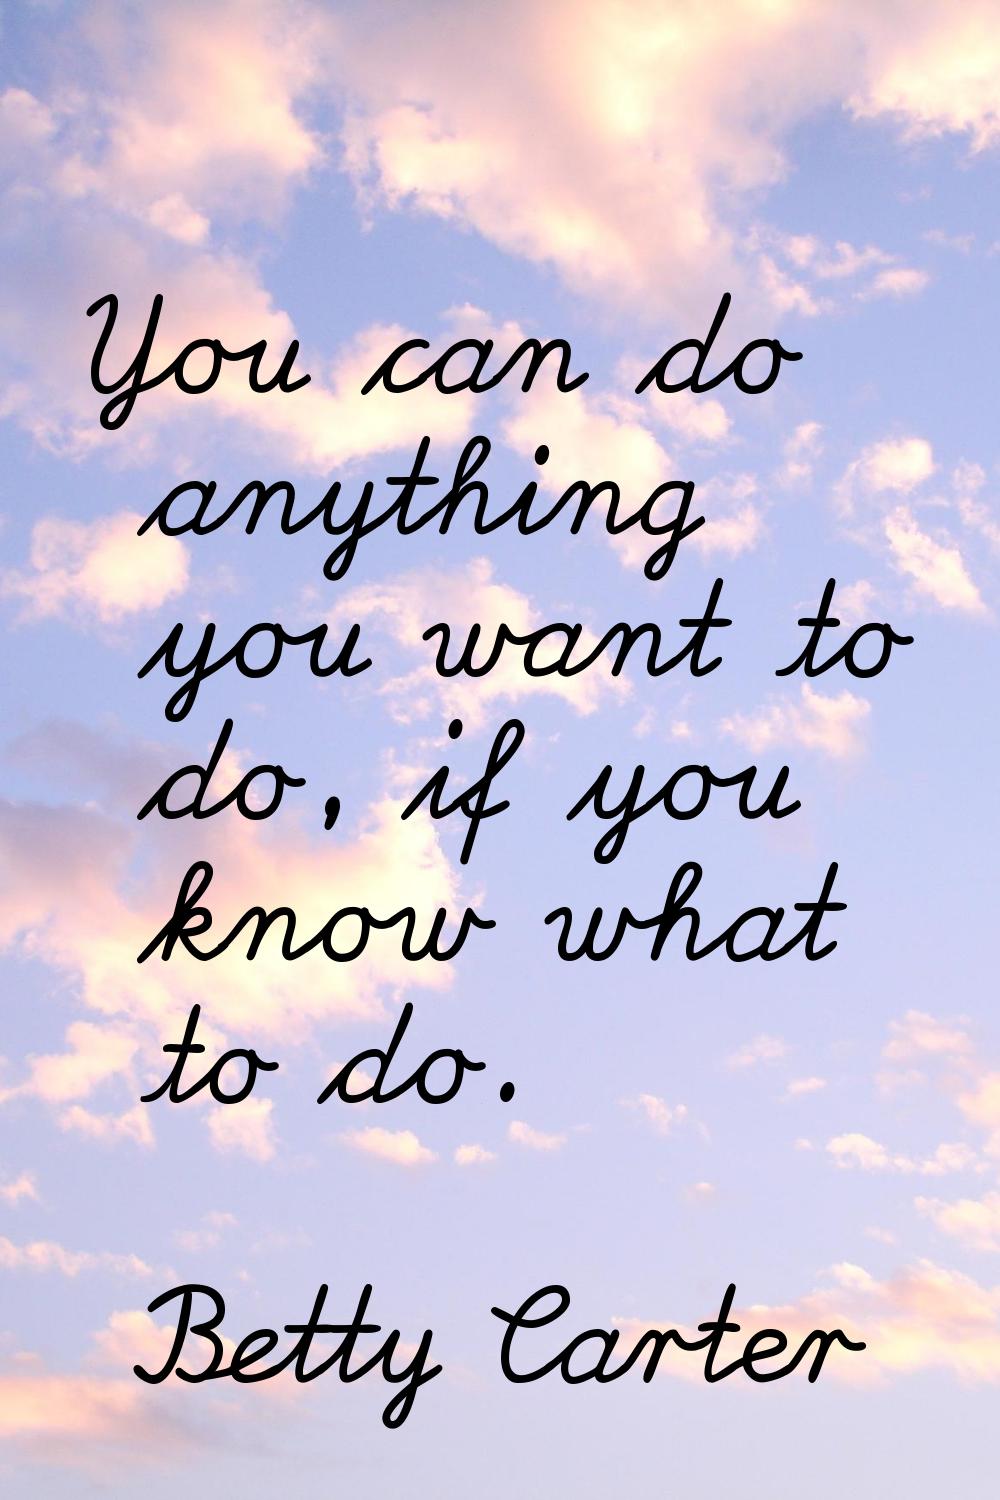 You can do anything you want to do, if you know what to do.